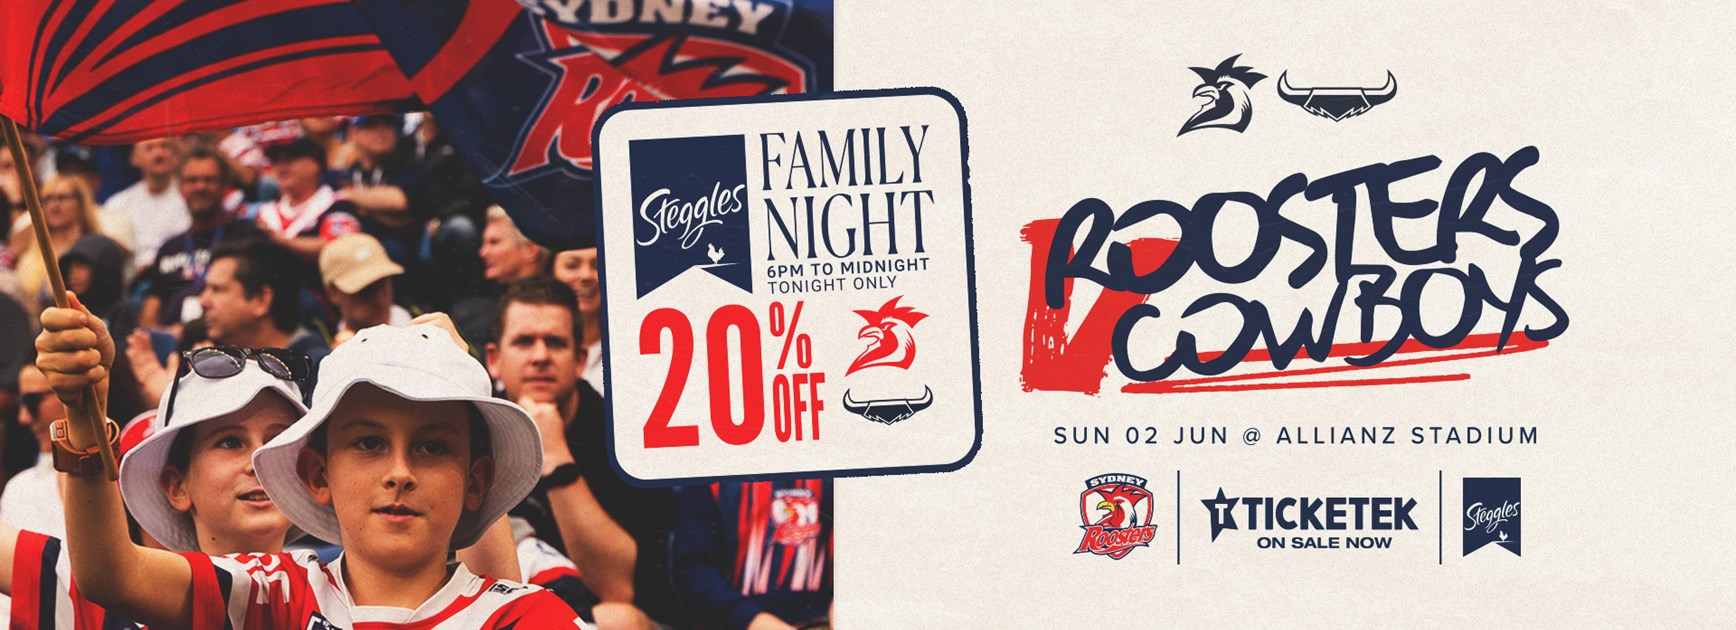 Get 20% Off All Round 13 Family Passes with Steggles Family Night!